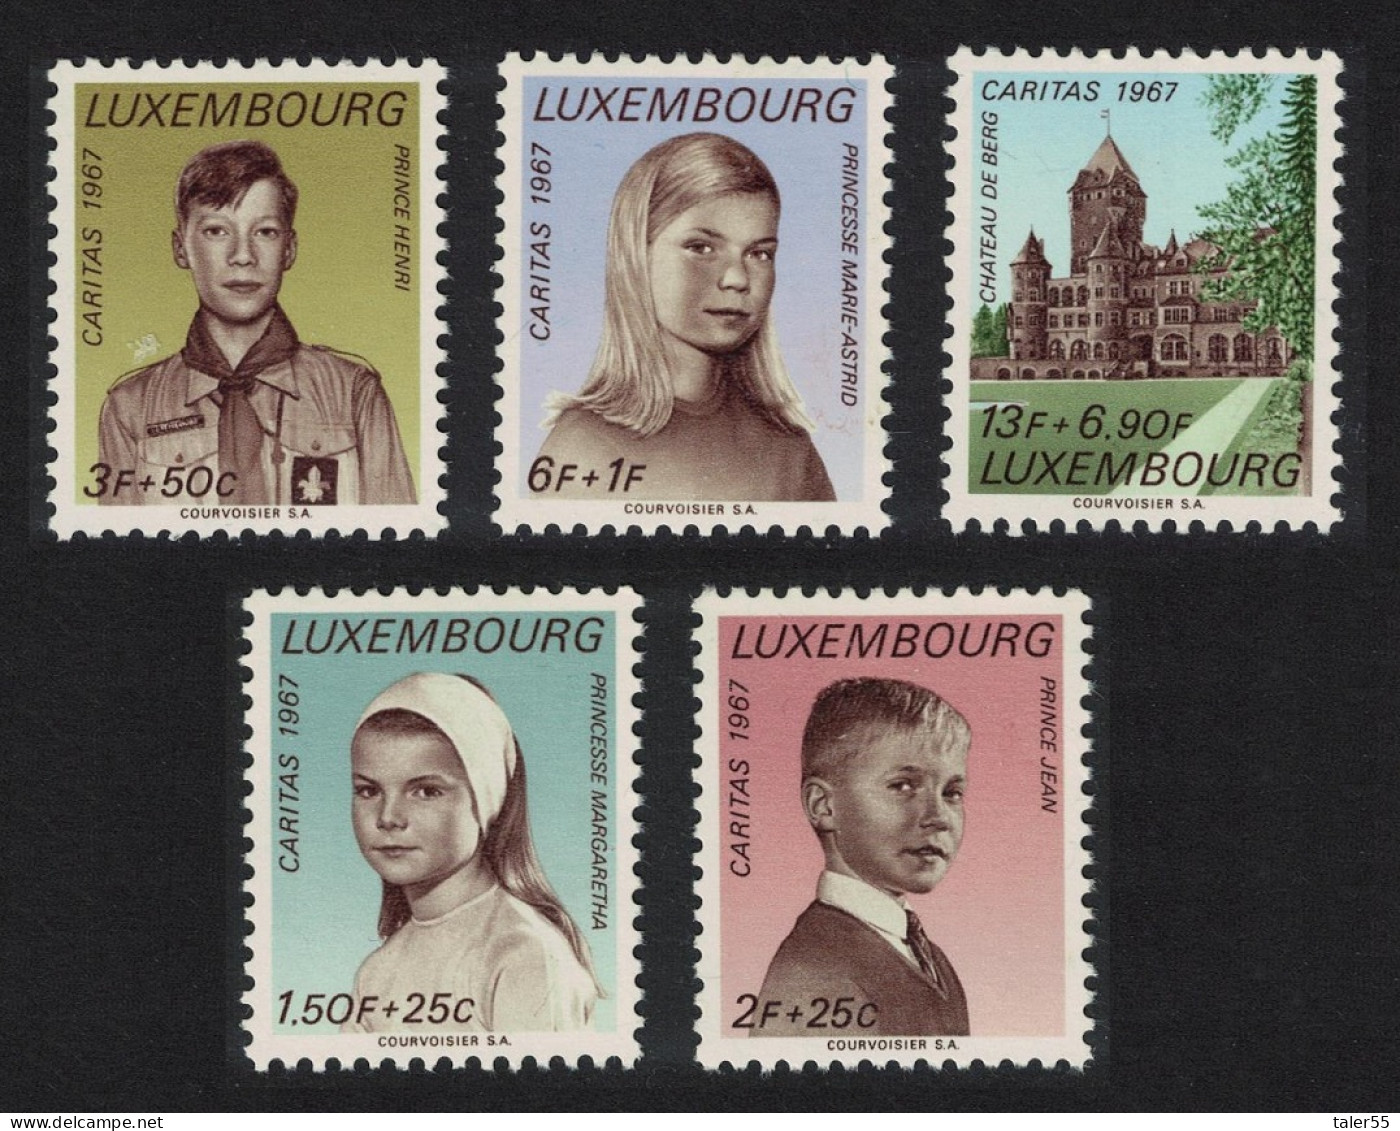 Luxembourg Royal Children And Residence 5v 1967 MNH SG#810-814 MI#760-764 - Neufs